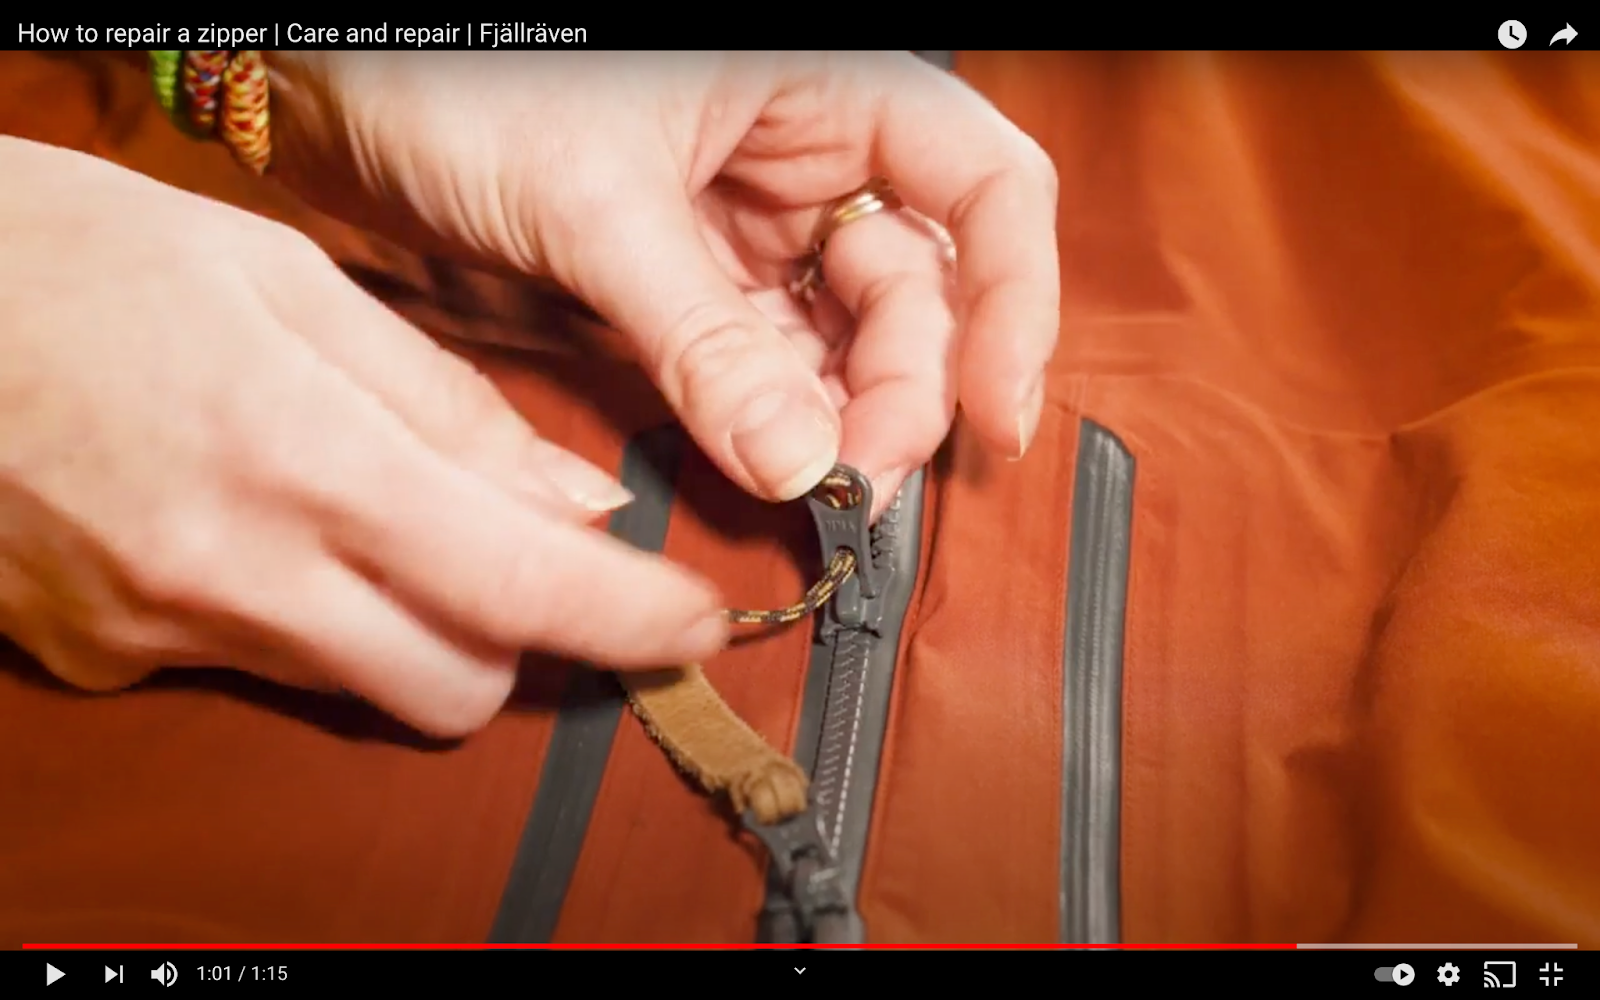 Fjallraven have created YouTube videos for simple home repairs - like how to mend a zipper.